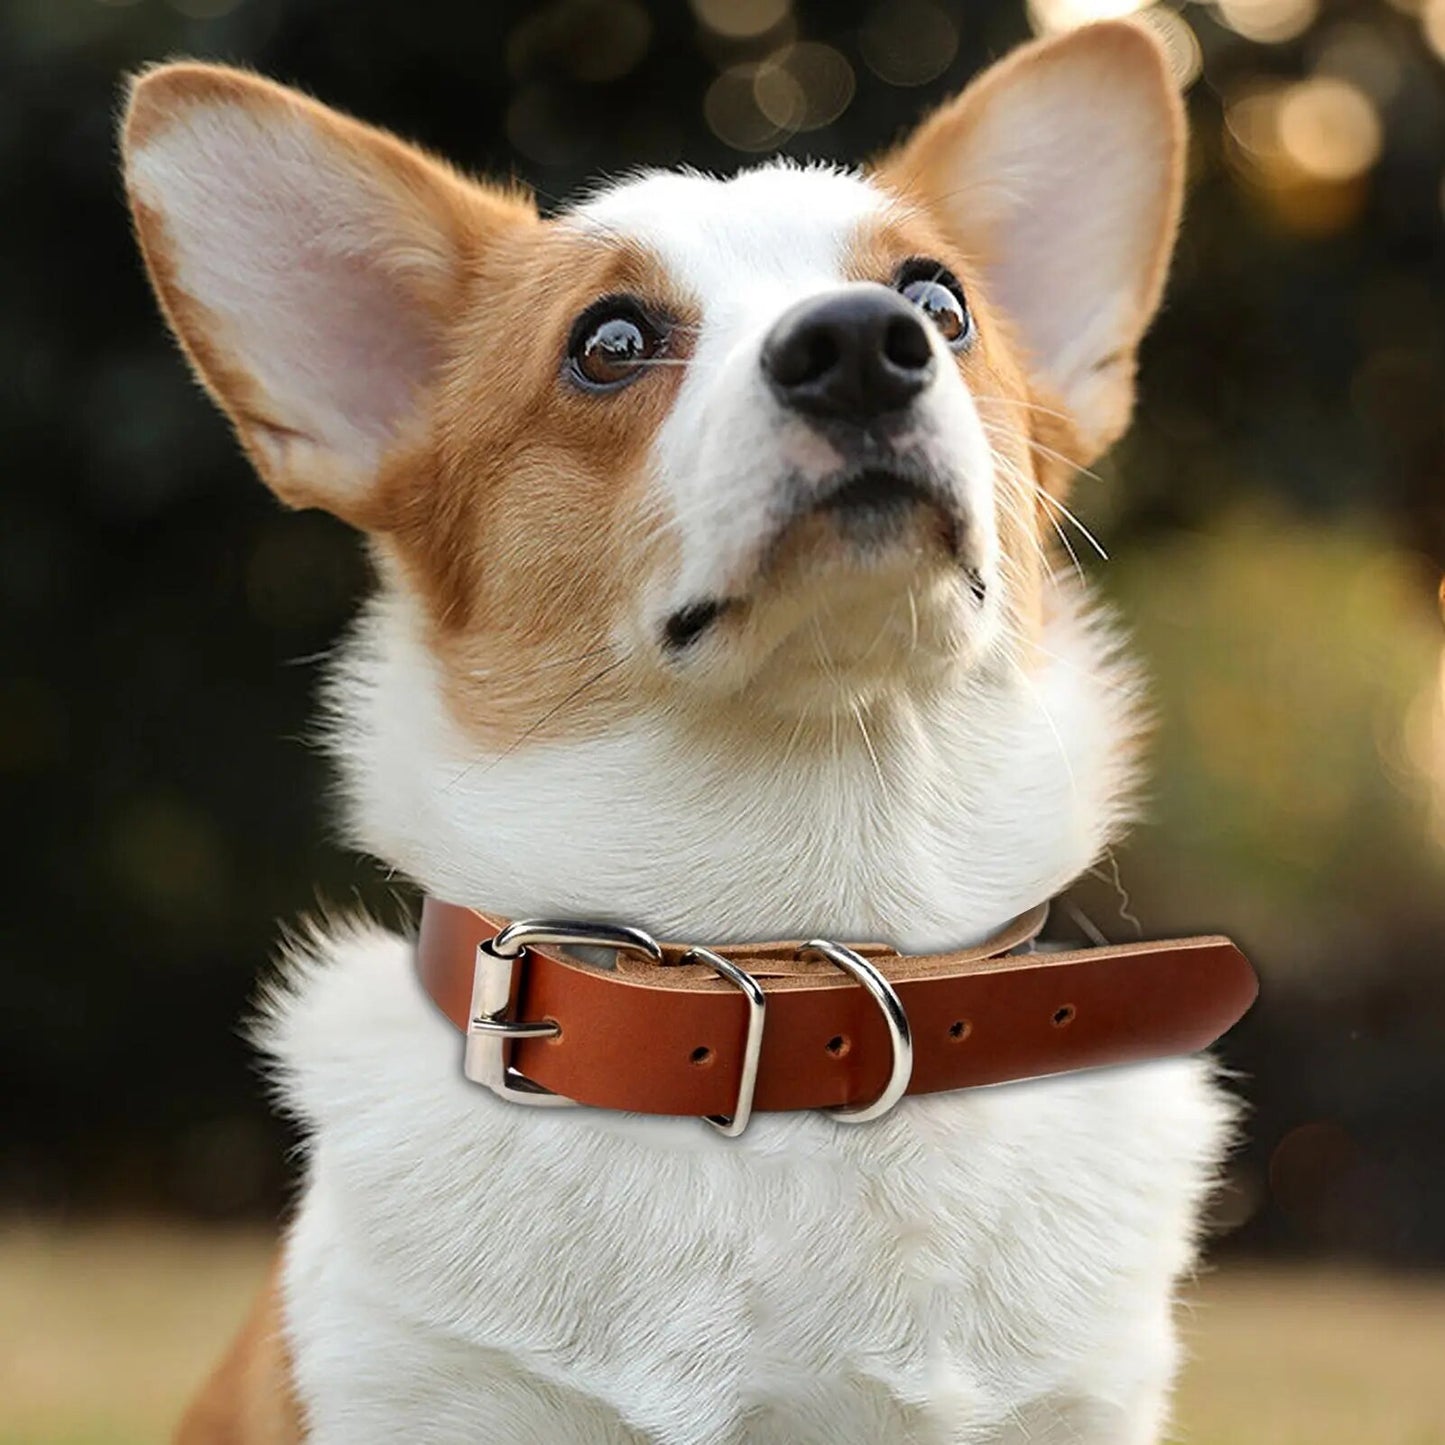 picture of a dog wearing the brown rolled leather dog collar